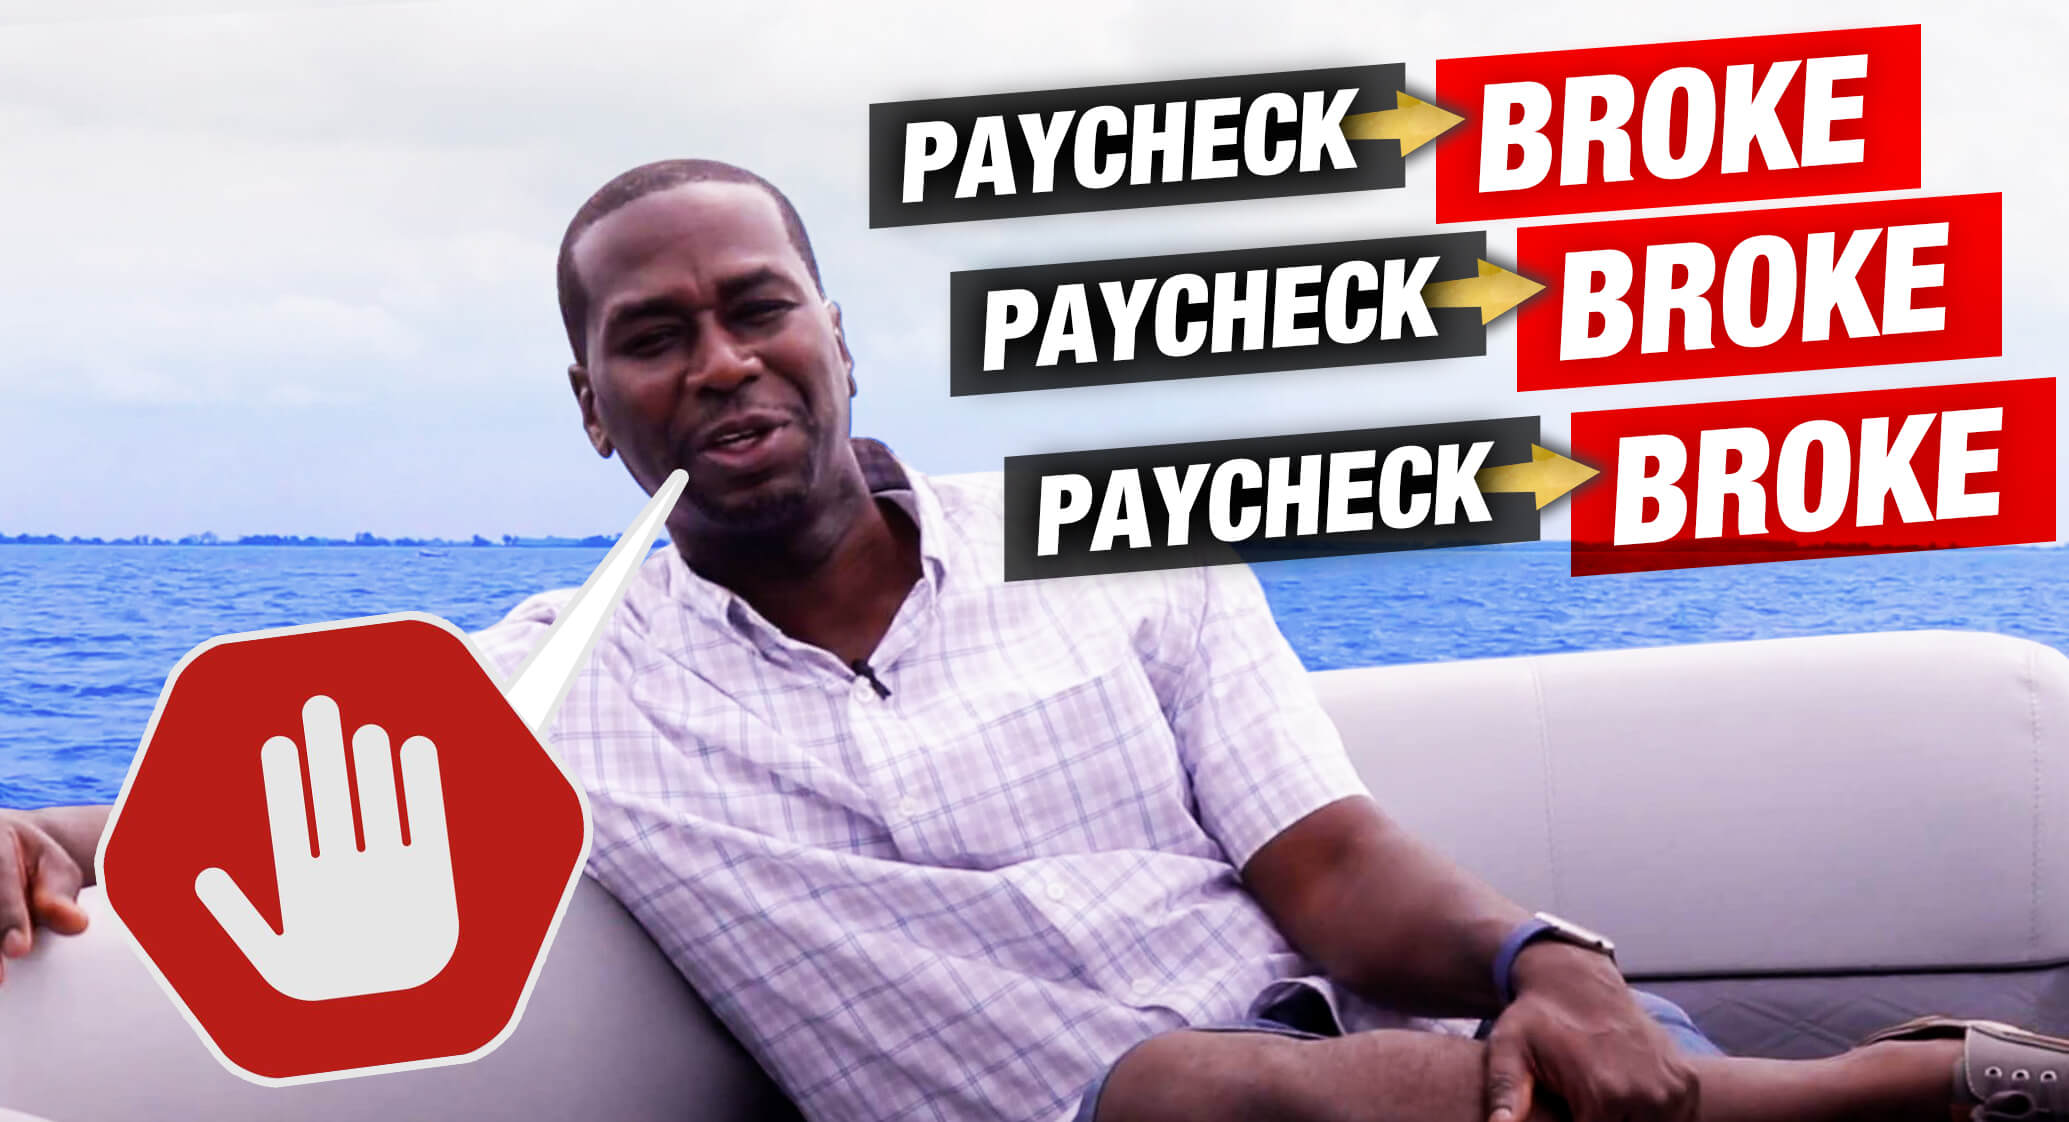 How Can You Stop Living Paycheck to Paycheck?